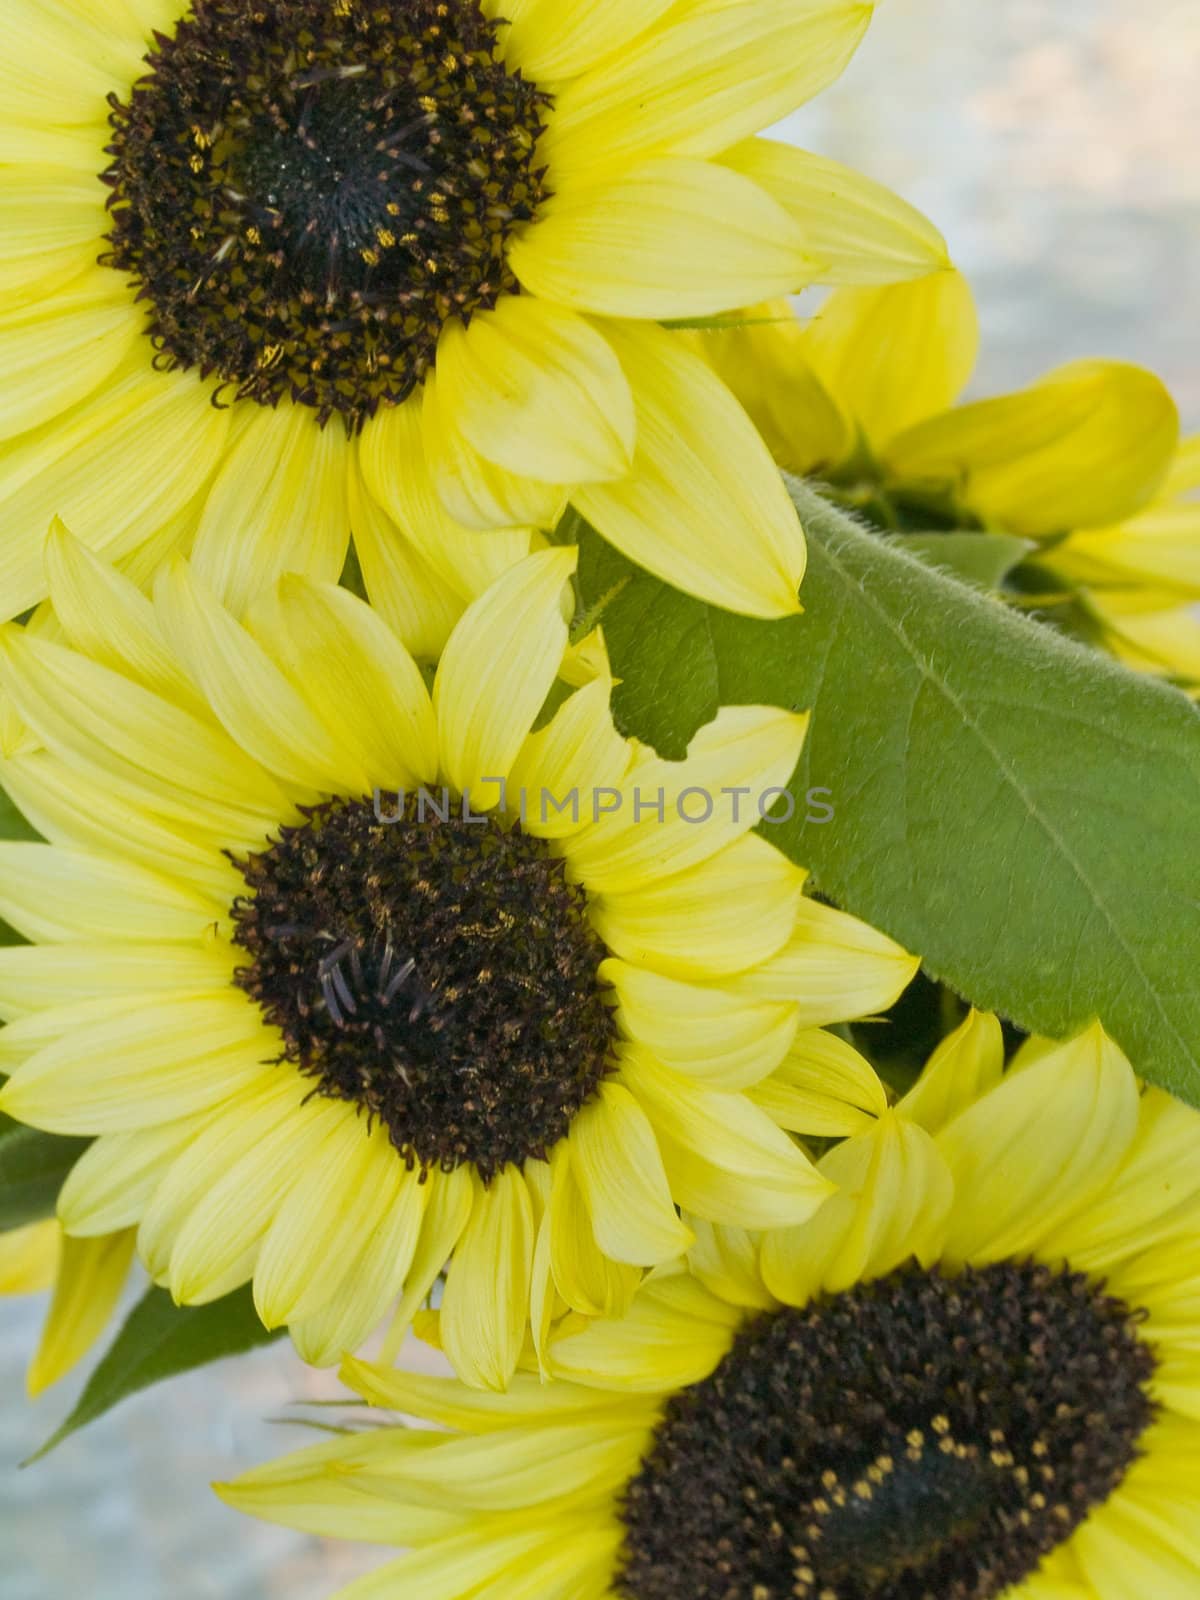 Close Ups of a Bunch of Sunflowers in a Vase